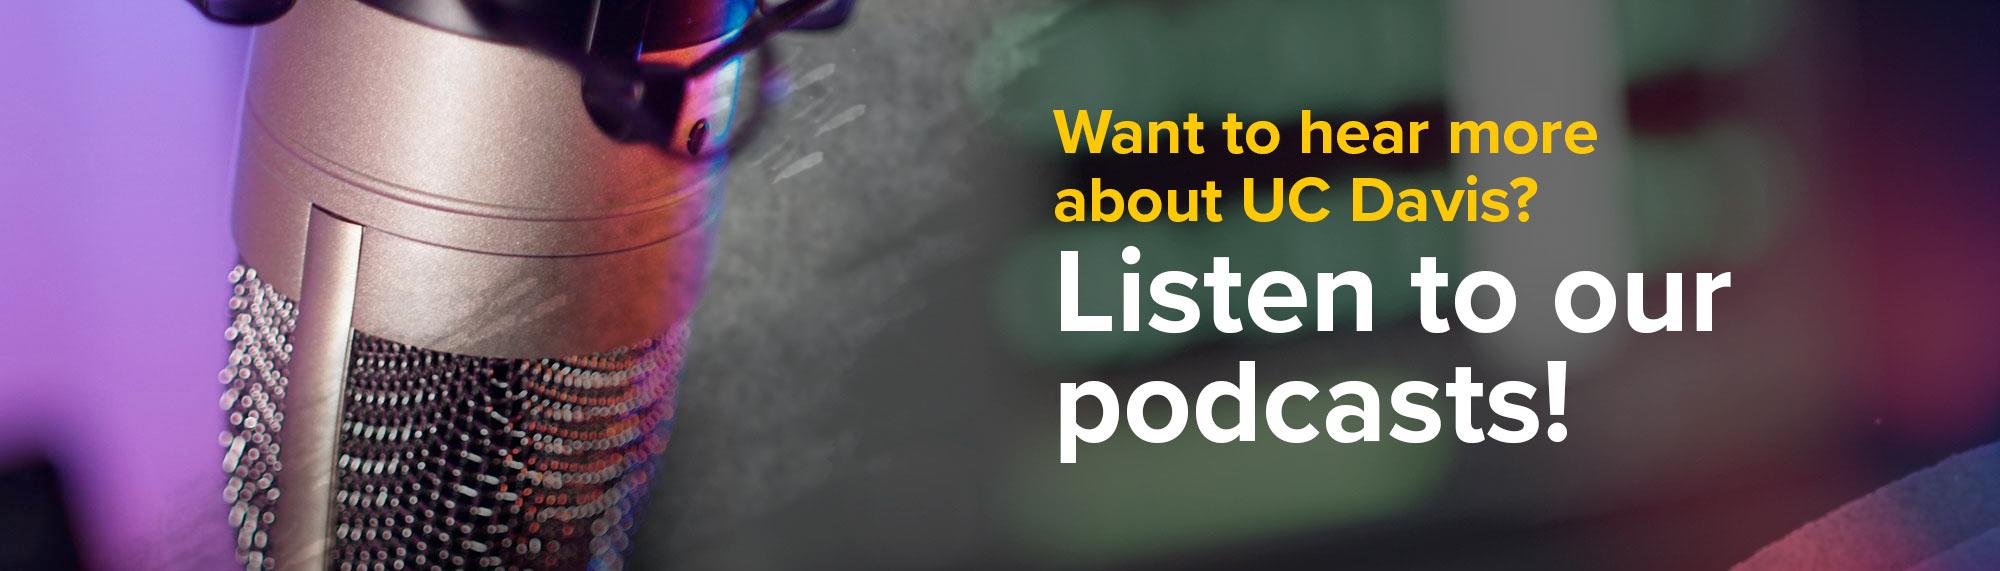 Want to hear more about ˽̳ Davis? Listen to our podcasts!